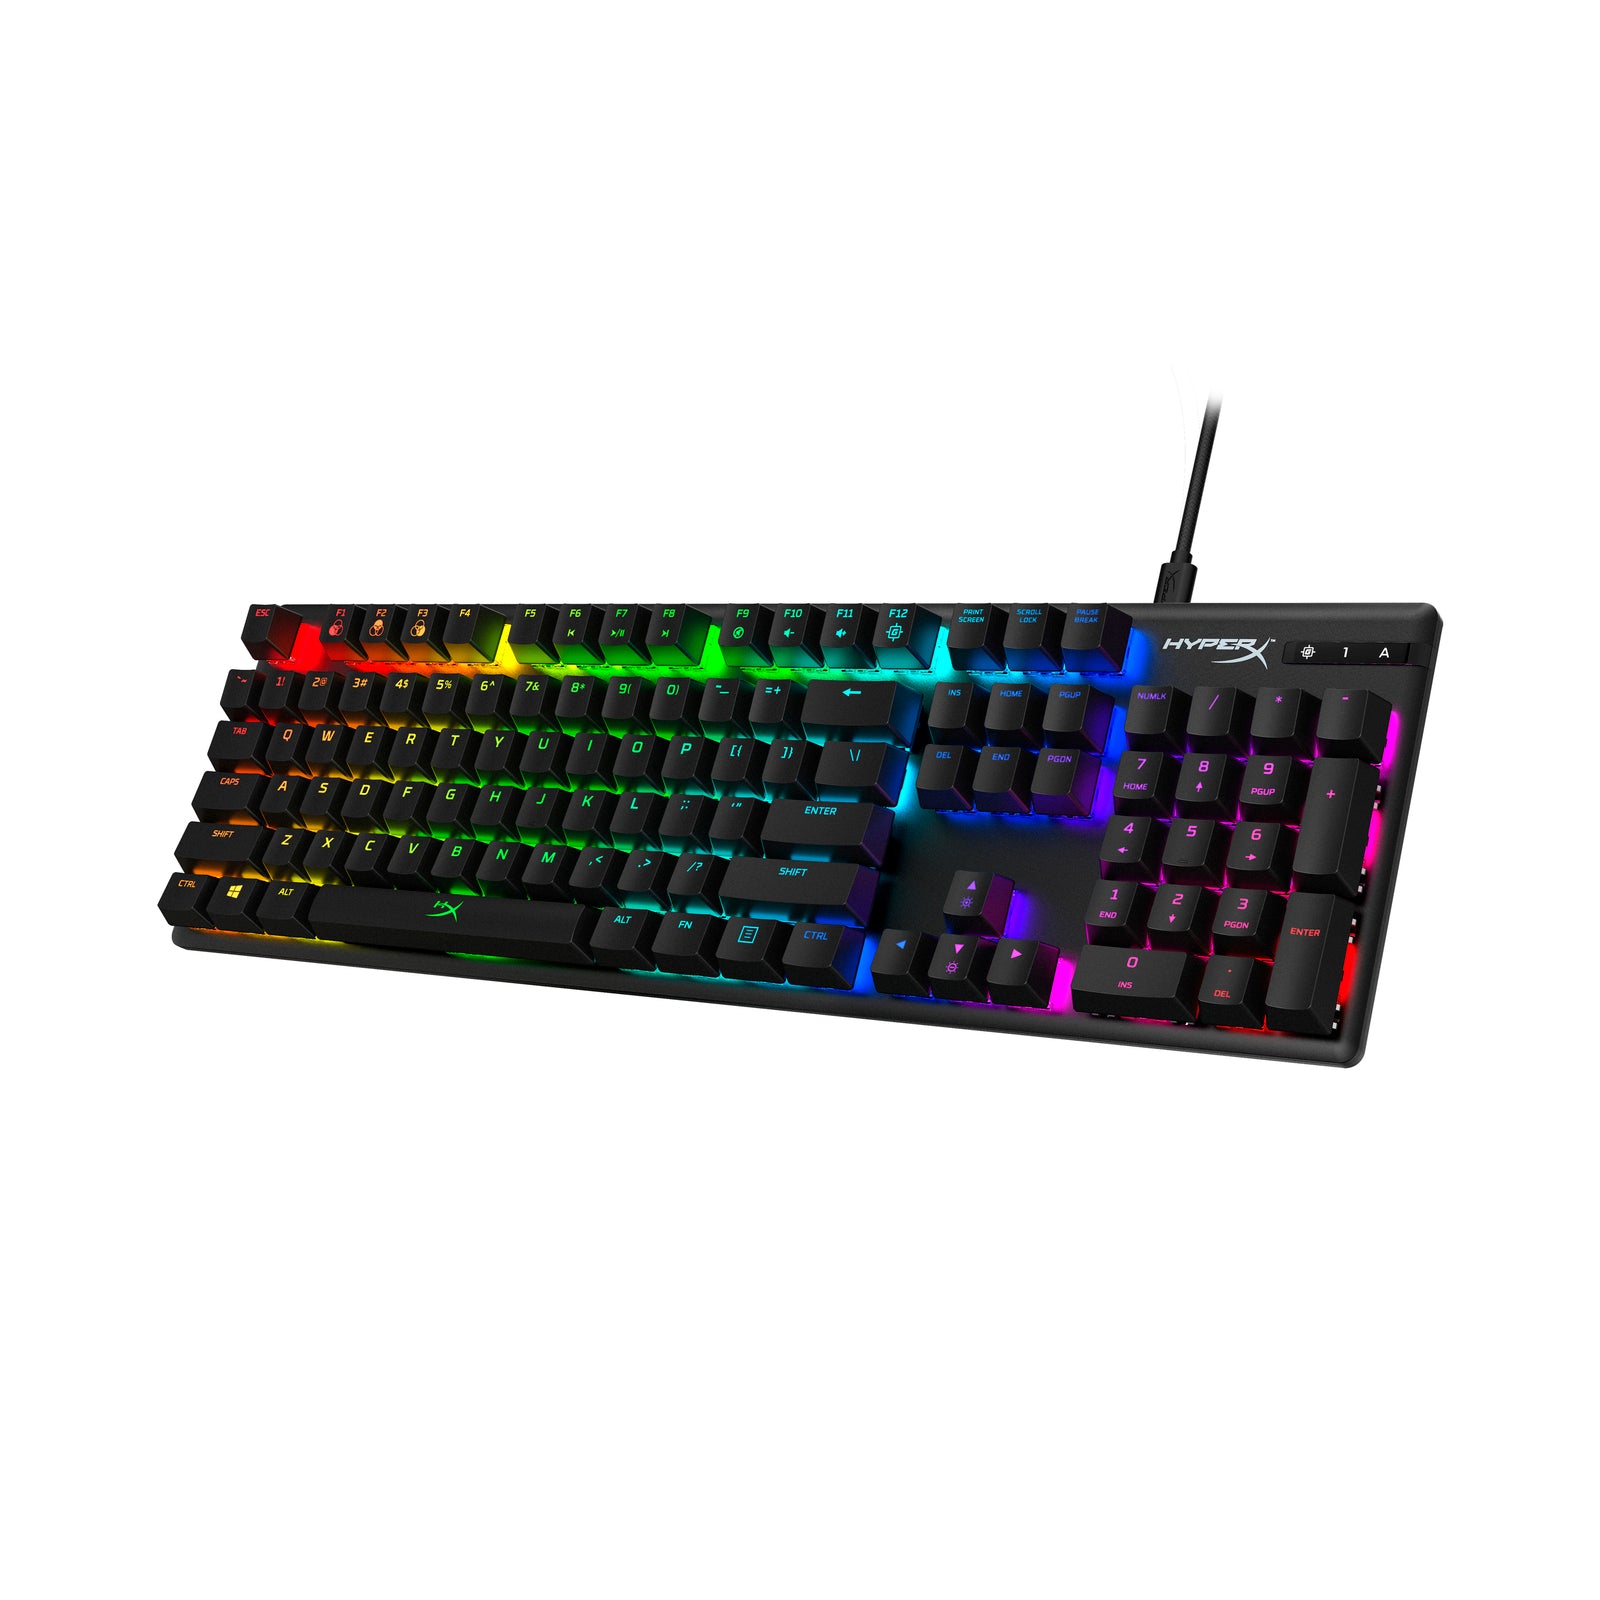 HyperX Alloy Origins Gaming Mechanical Keyboard showing the right side view featuring customizable RGB lighting